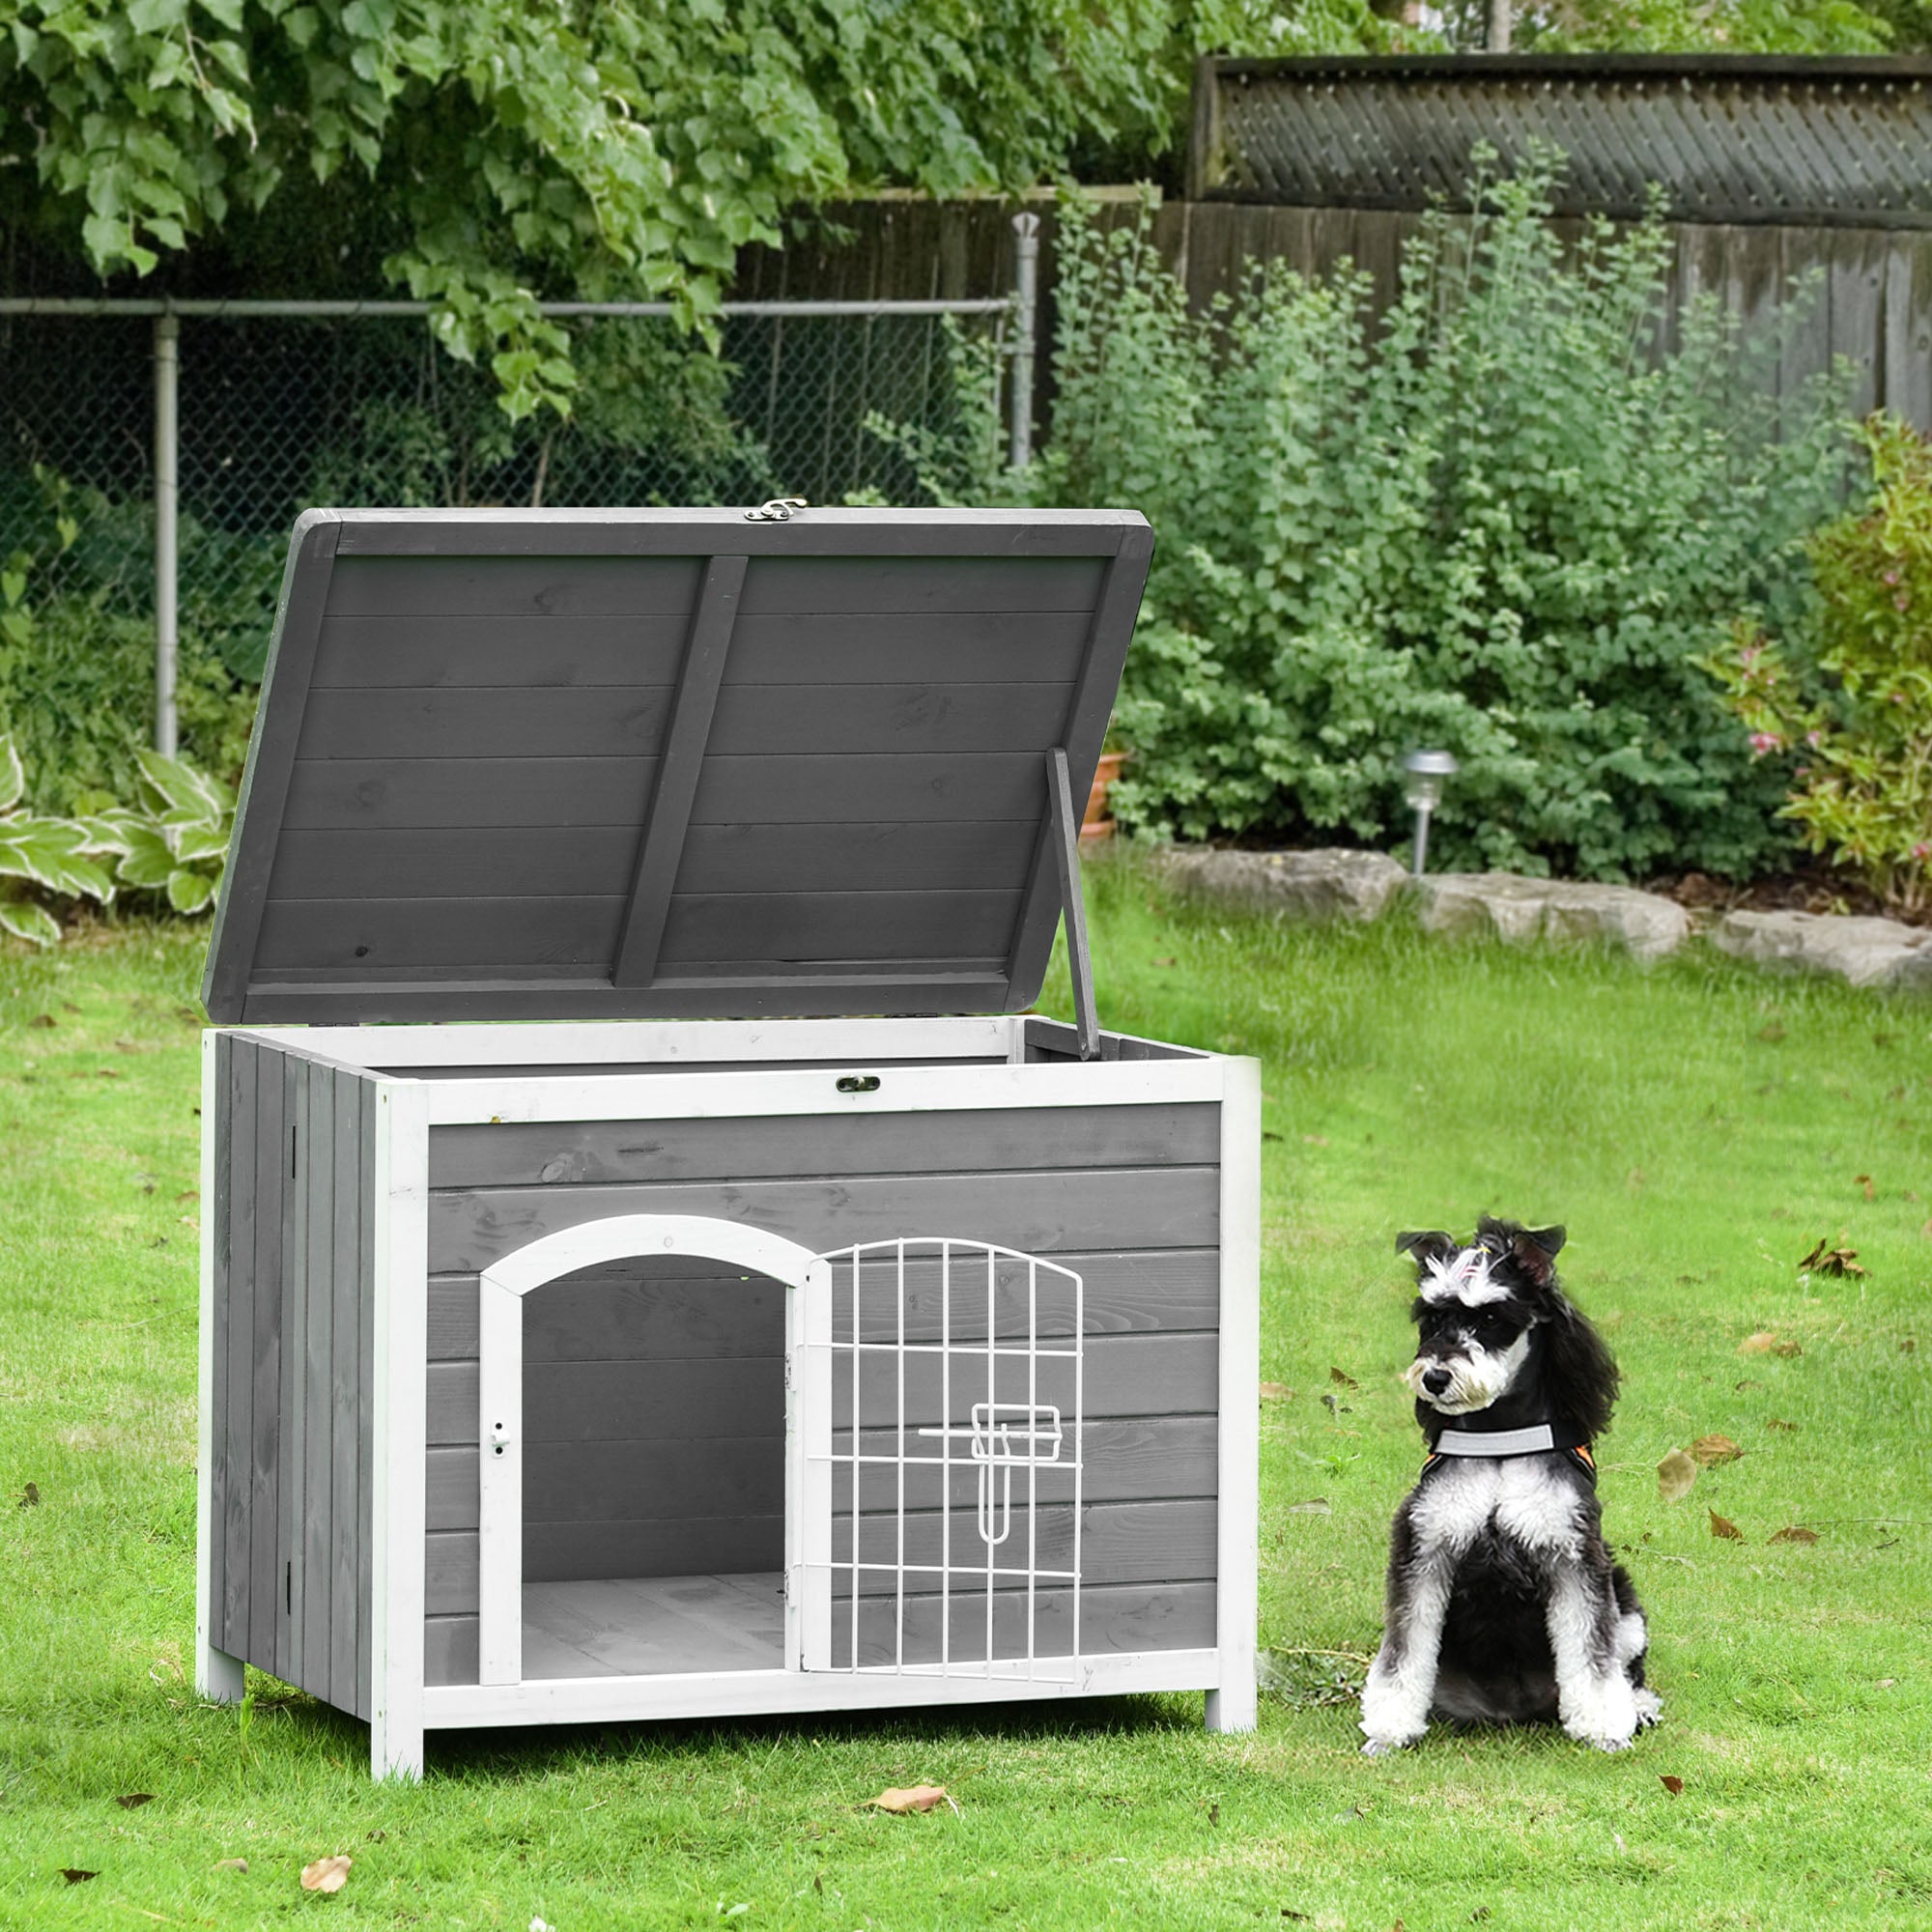 Tomshoo Foldable Raised Wooden Dog House Indoor and Outdoor Dog Cage Kennel Cat House w/ Lockable Door Openable Roof Removable Bottom for Small and Medium Pets Grey